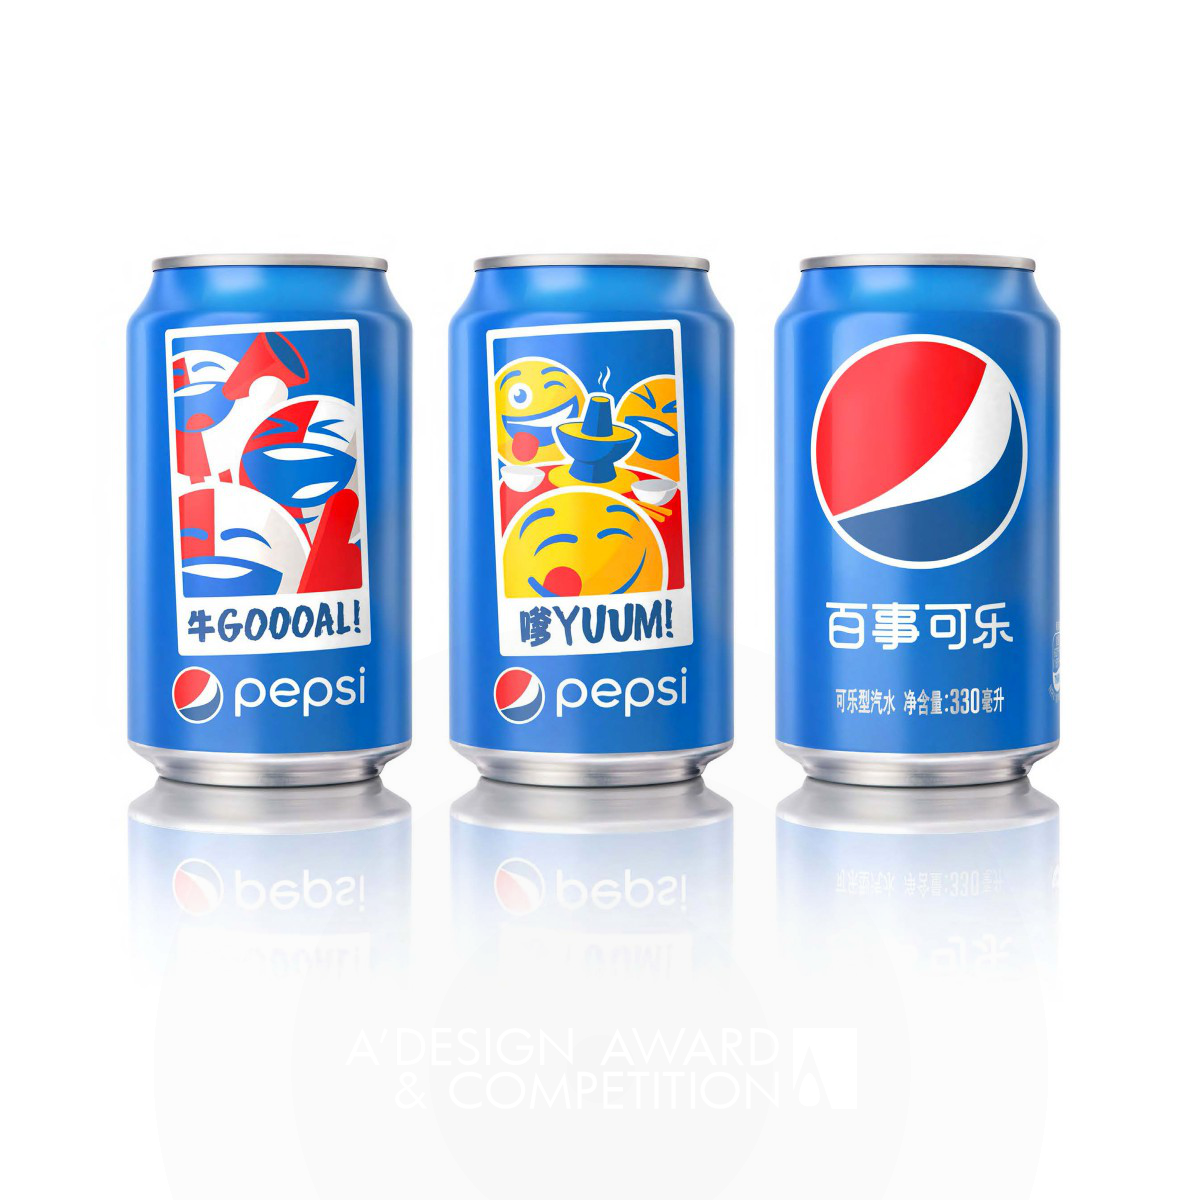 Pepsi Moments CHINA <b>Augmented Reality Ltd Ed Cans Campaign